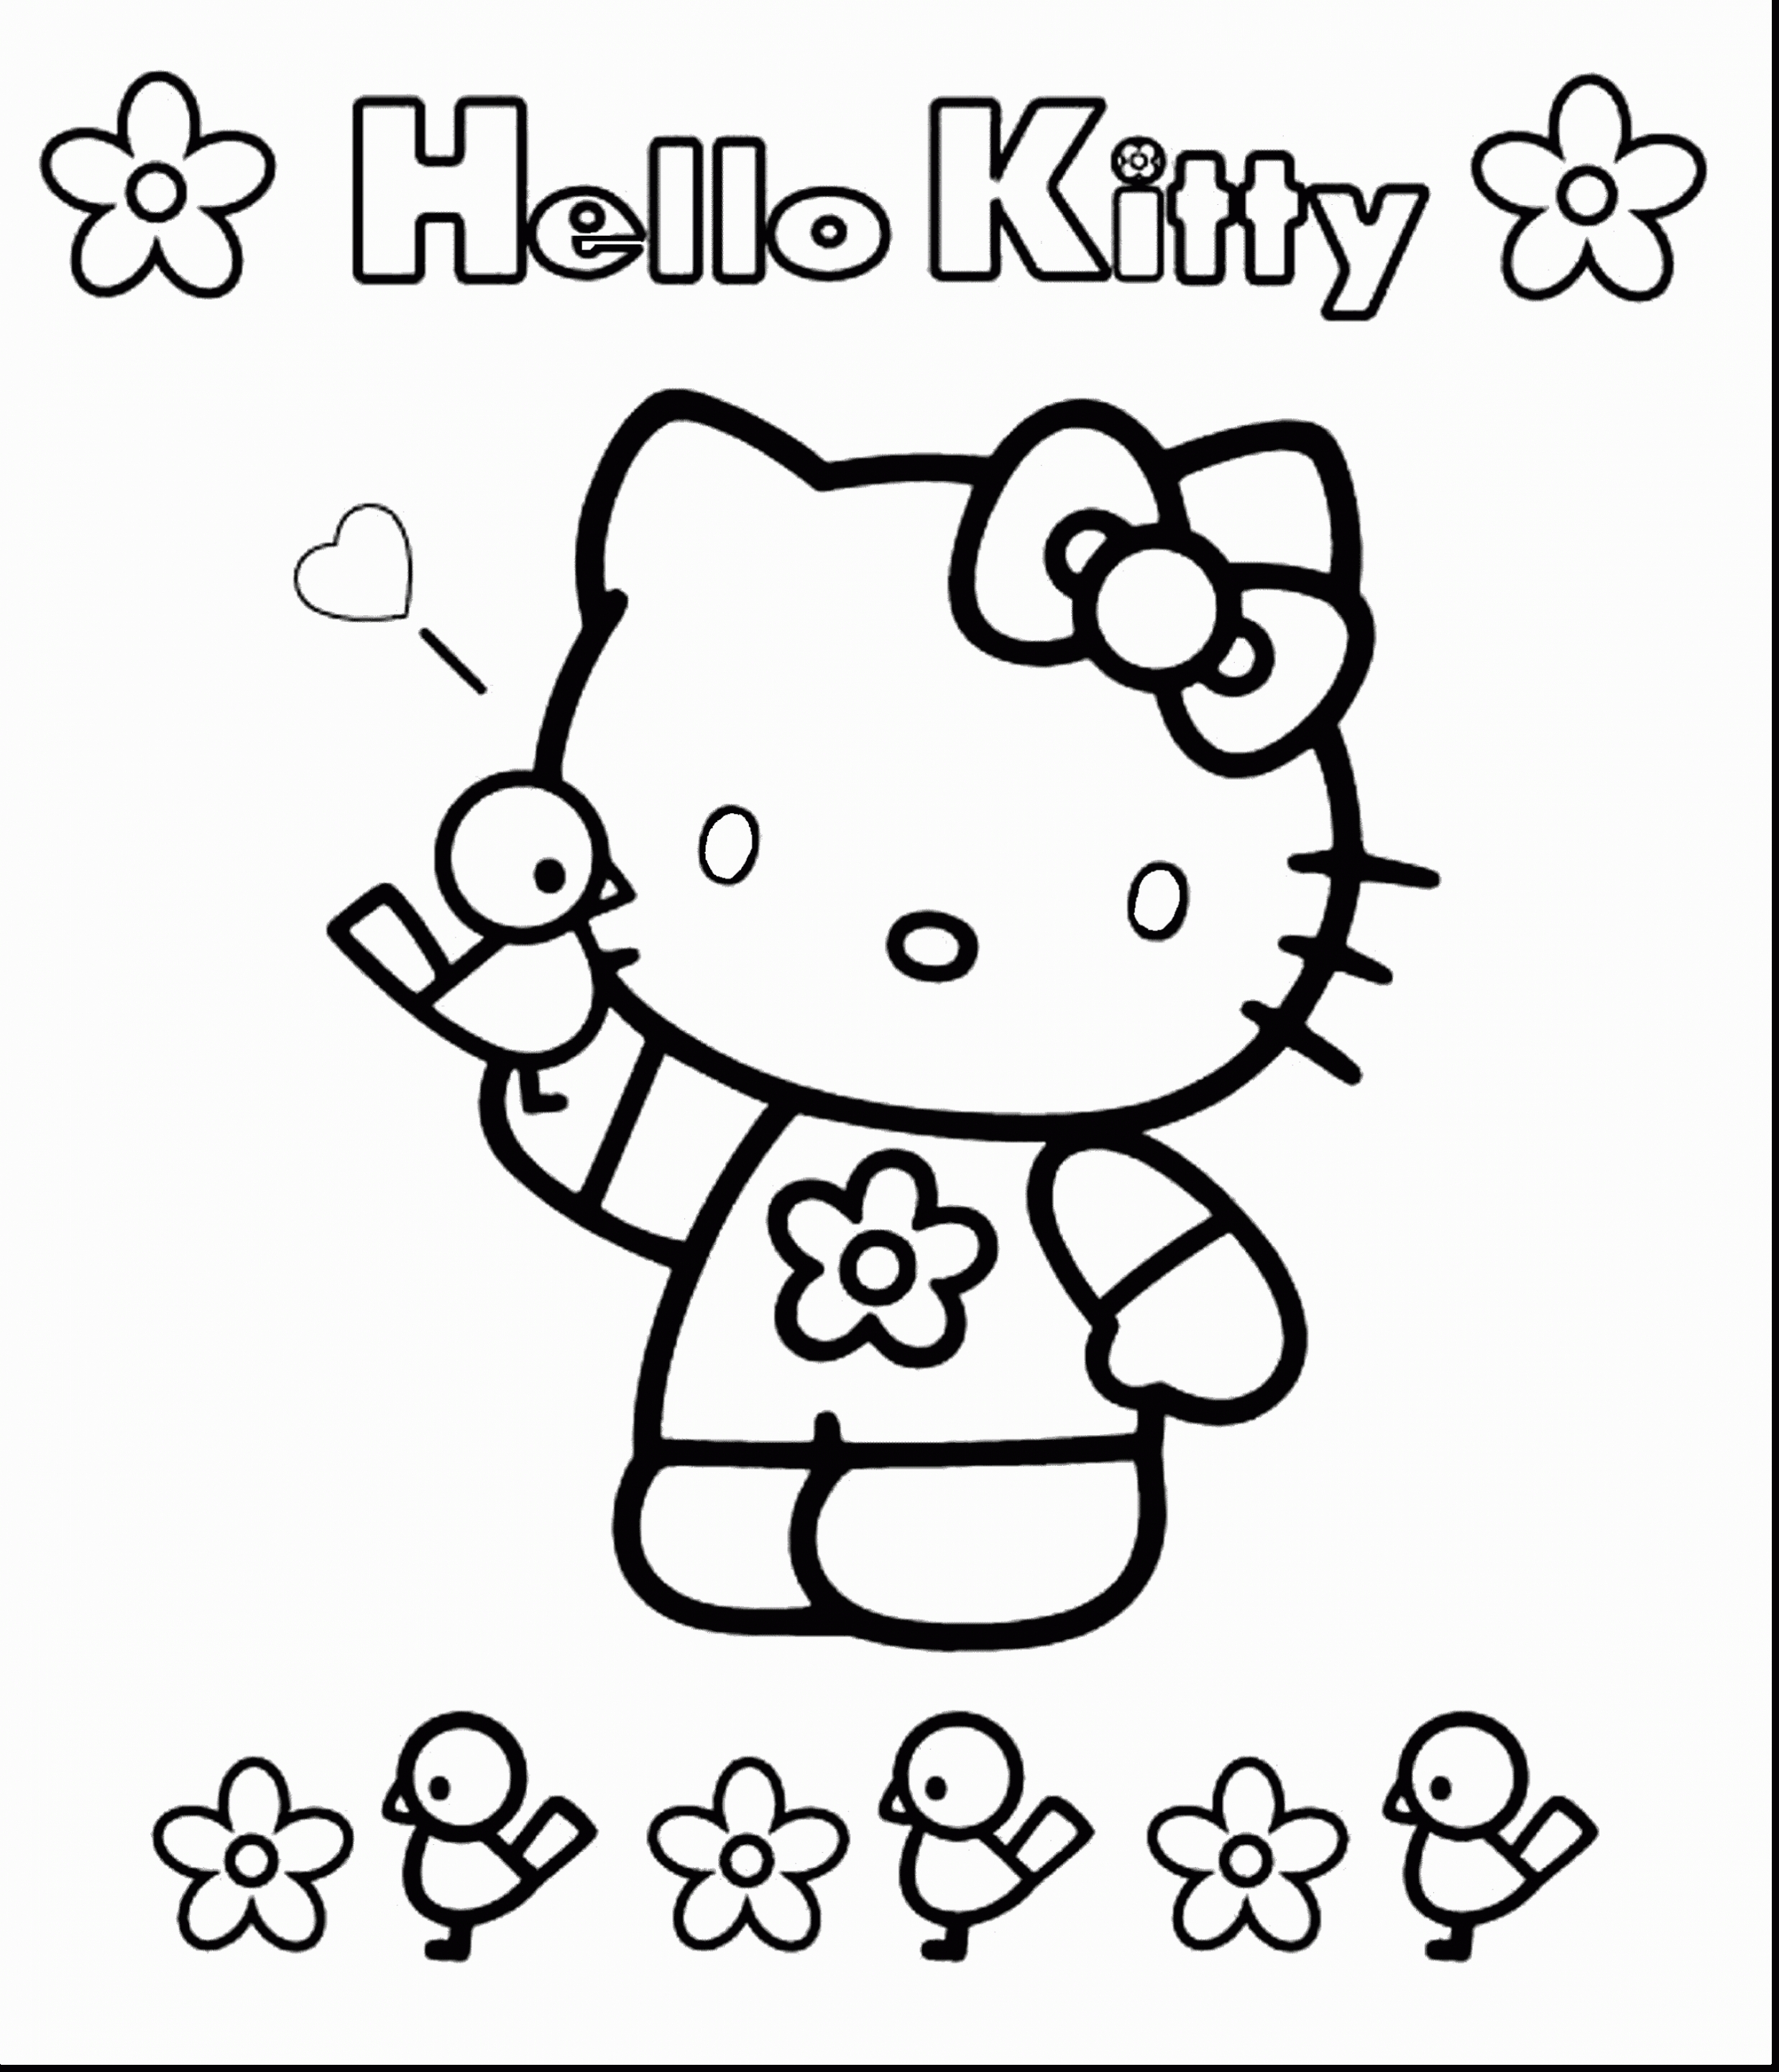 Hellokids Com Coloring Pages at GetColorings.com | Free printable